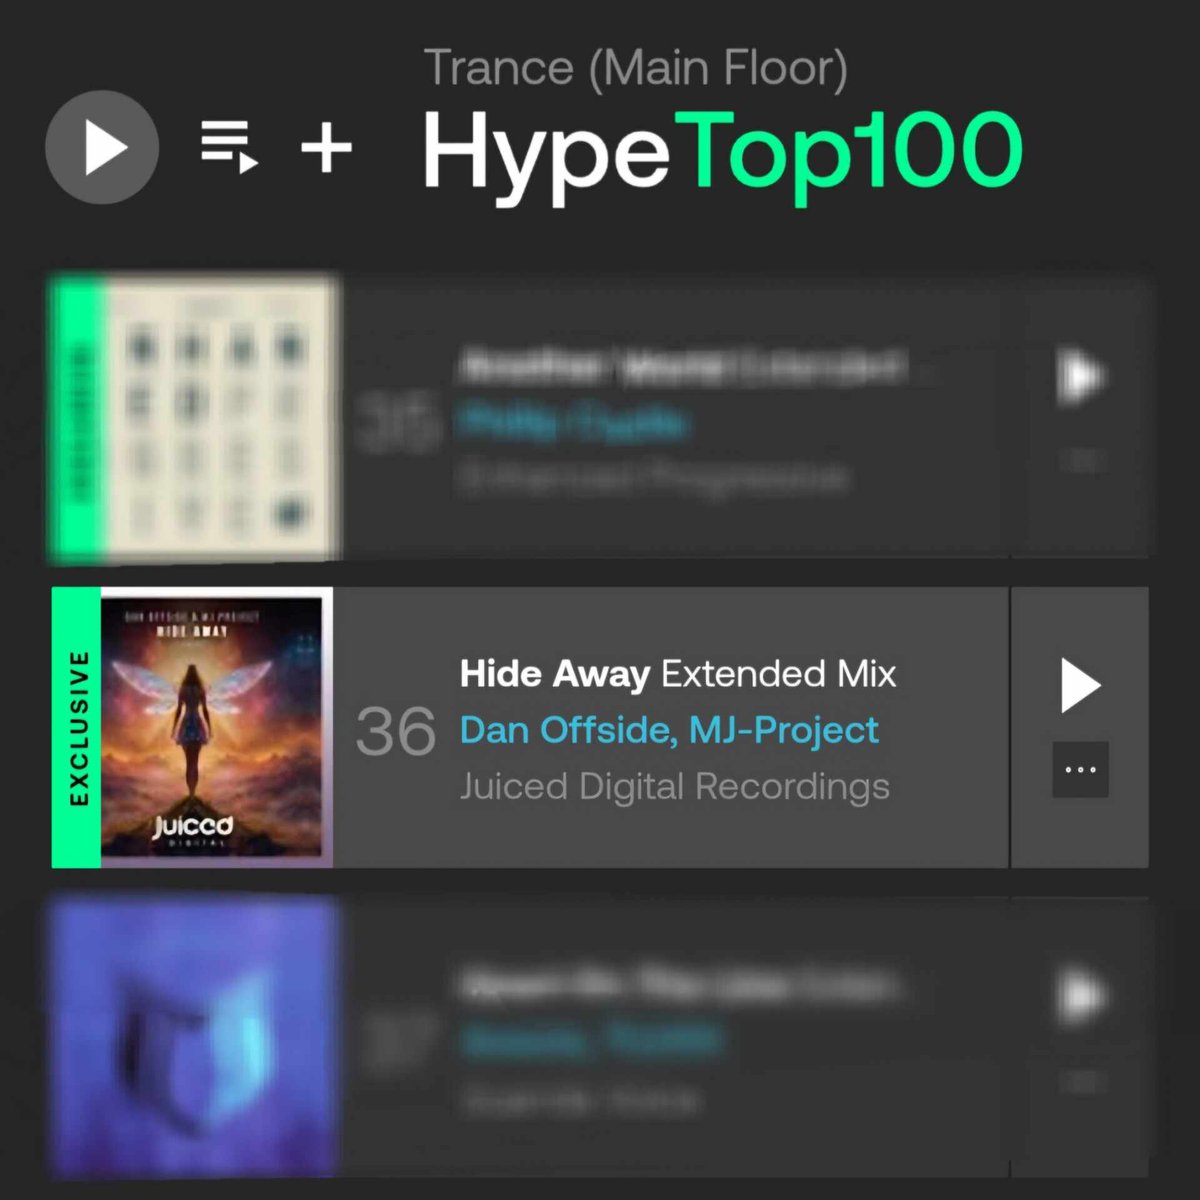 Climbing to no. 36 in the @beatport trance hype chart Dan Offside & MJ Project - Hide Away Buy here: juiceddigital.ampsuite.com/releases/links… Released by: Juiced Digital #trance #trancefamily #fypシ゚ #techtrance #upliftingtrance #juicedpure #releaseday #beatport #juiceddigital #vocaltrance